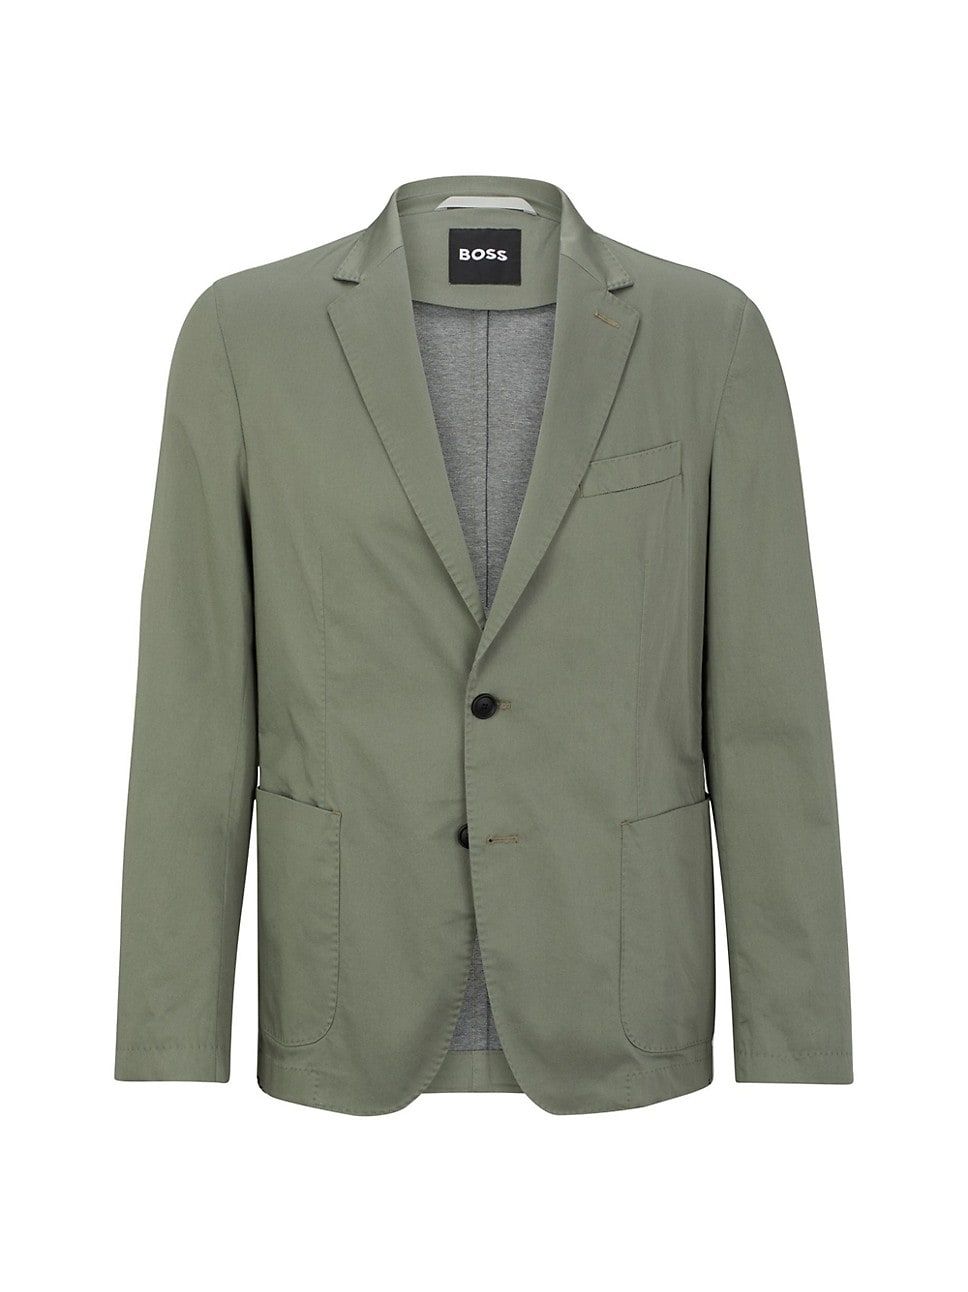 Slim-Fit Jacket in a Crease-Resistant Cotton Blend | Saks Fifth Avenue